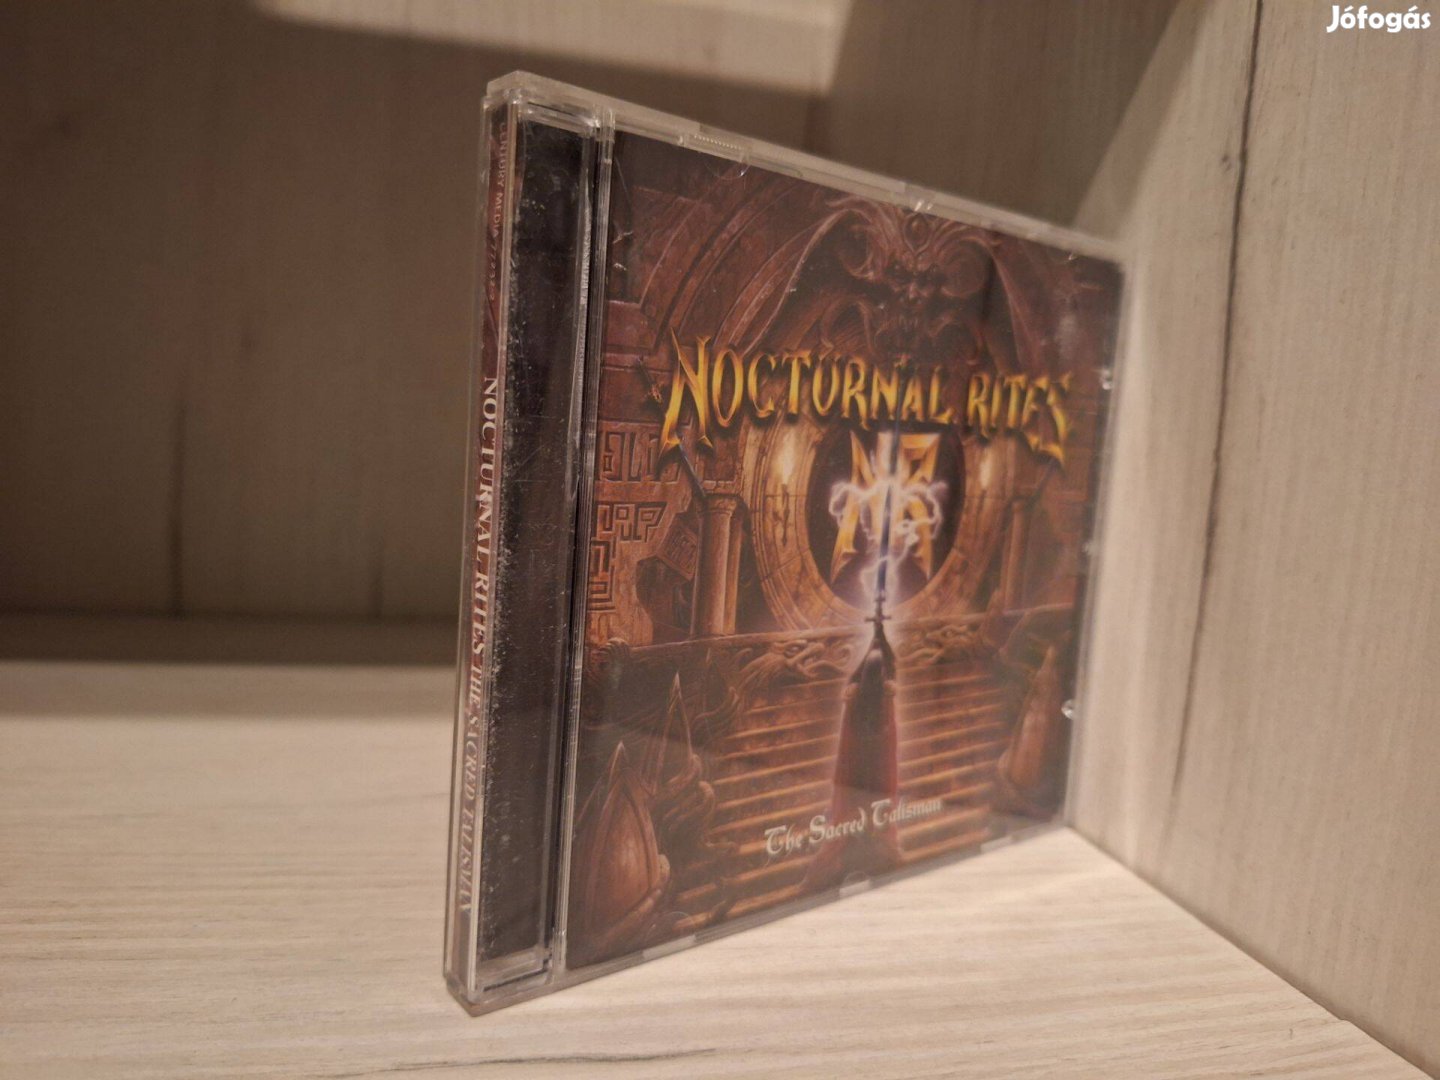 Nocturnal Rites - The Sacred Talisman CD